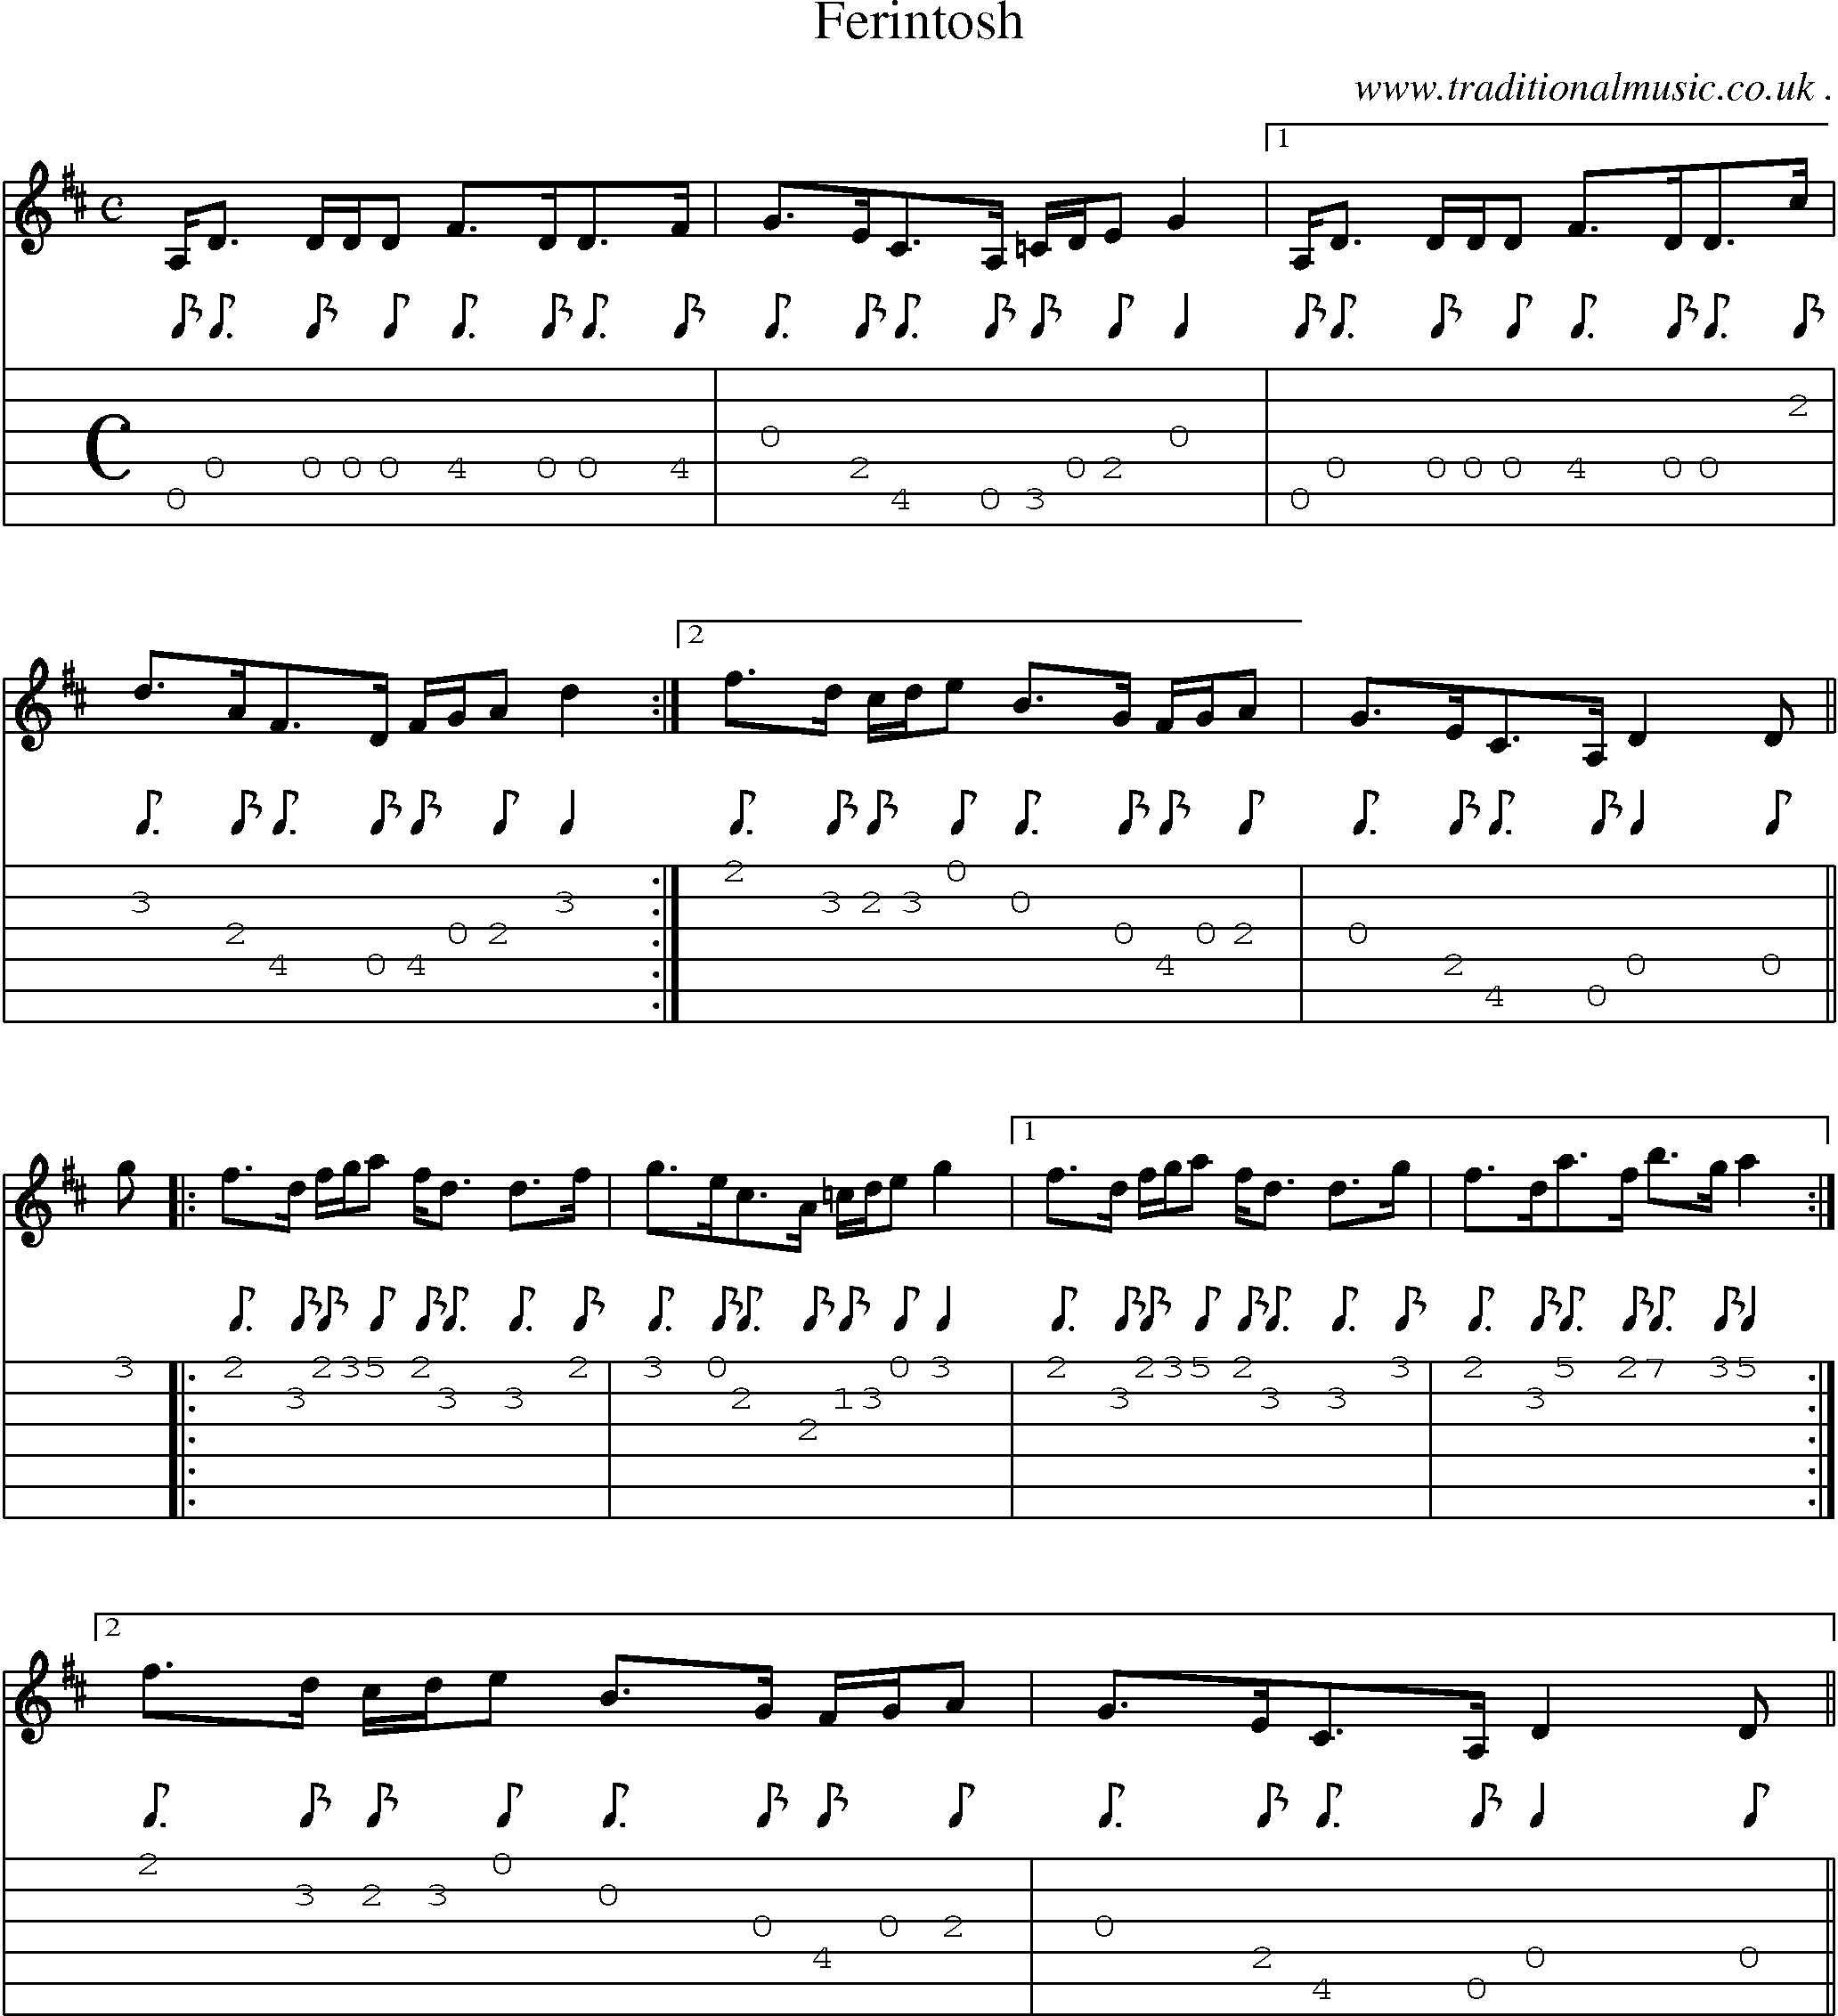 Sheet-music  score, Chords and Guitar Tabs for Ferintosh